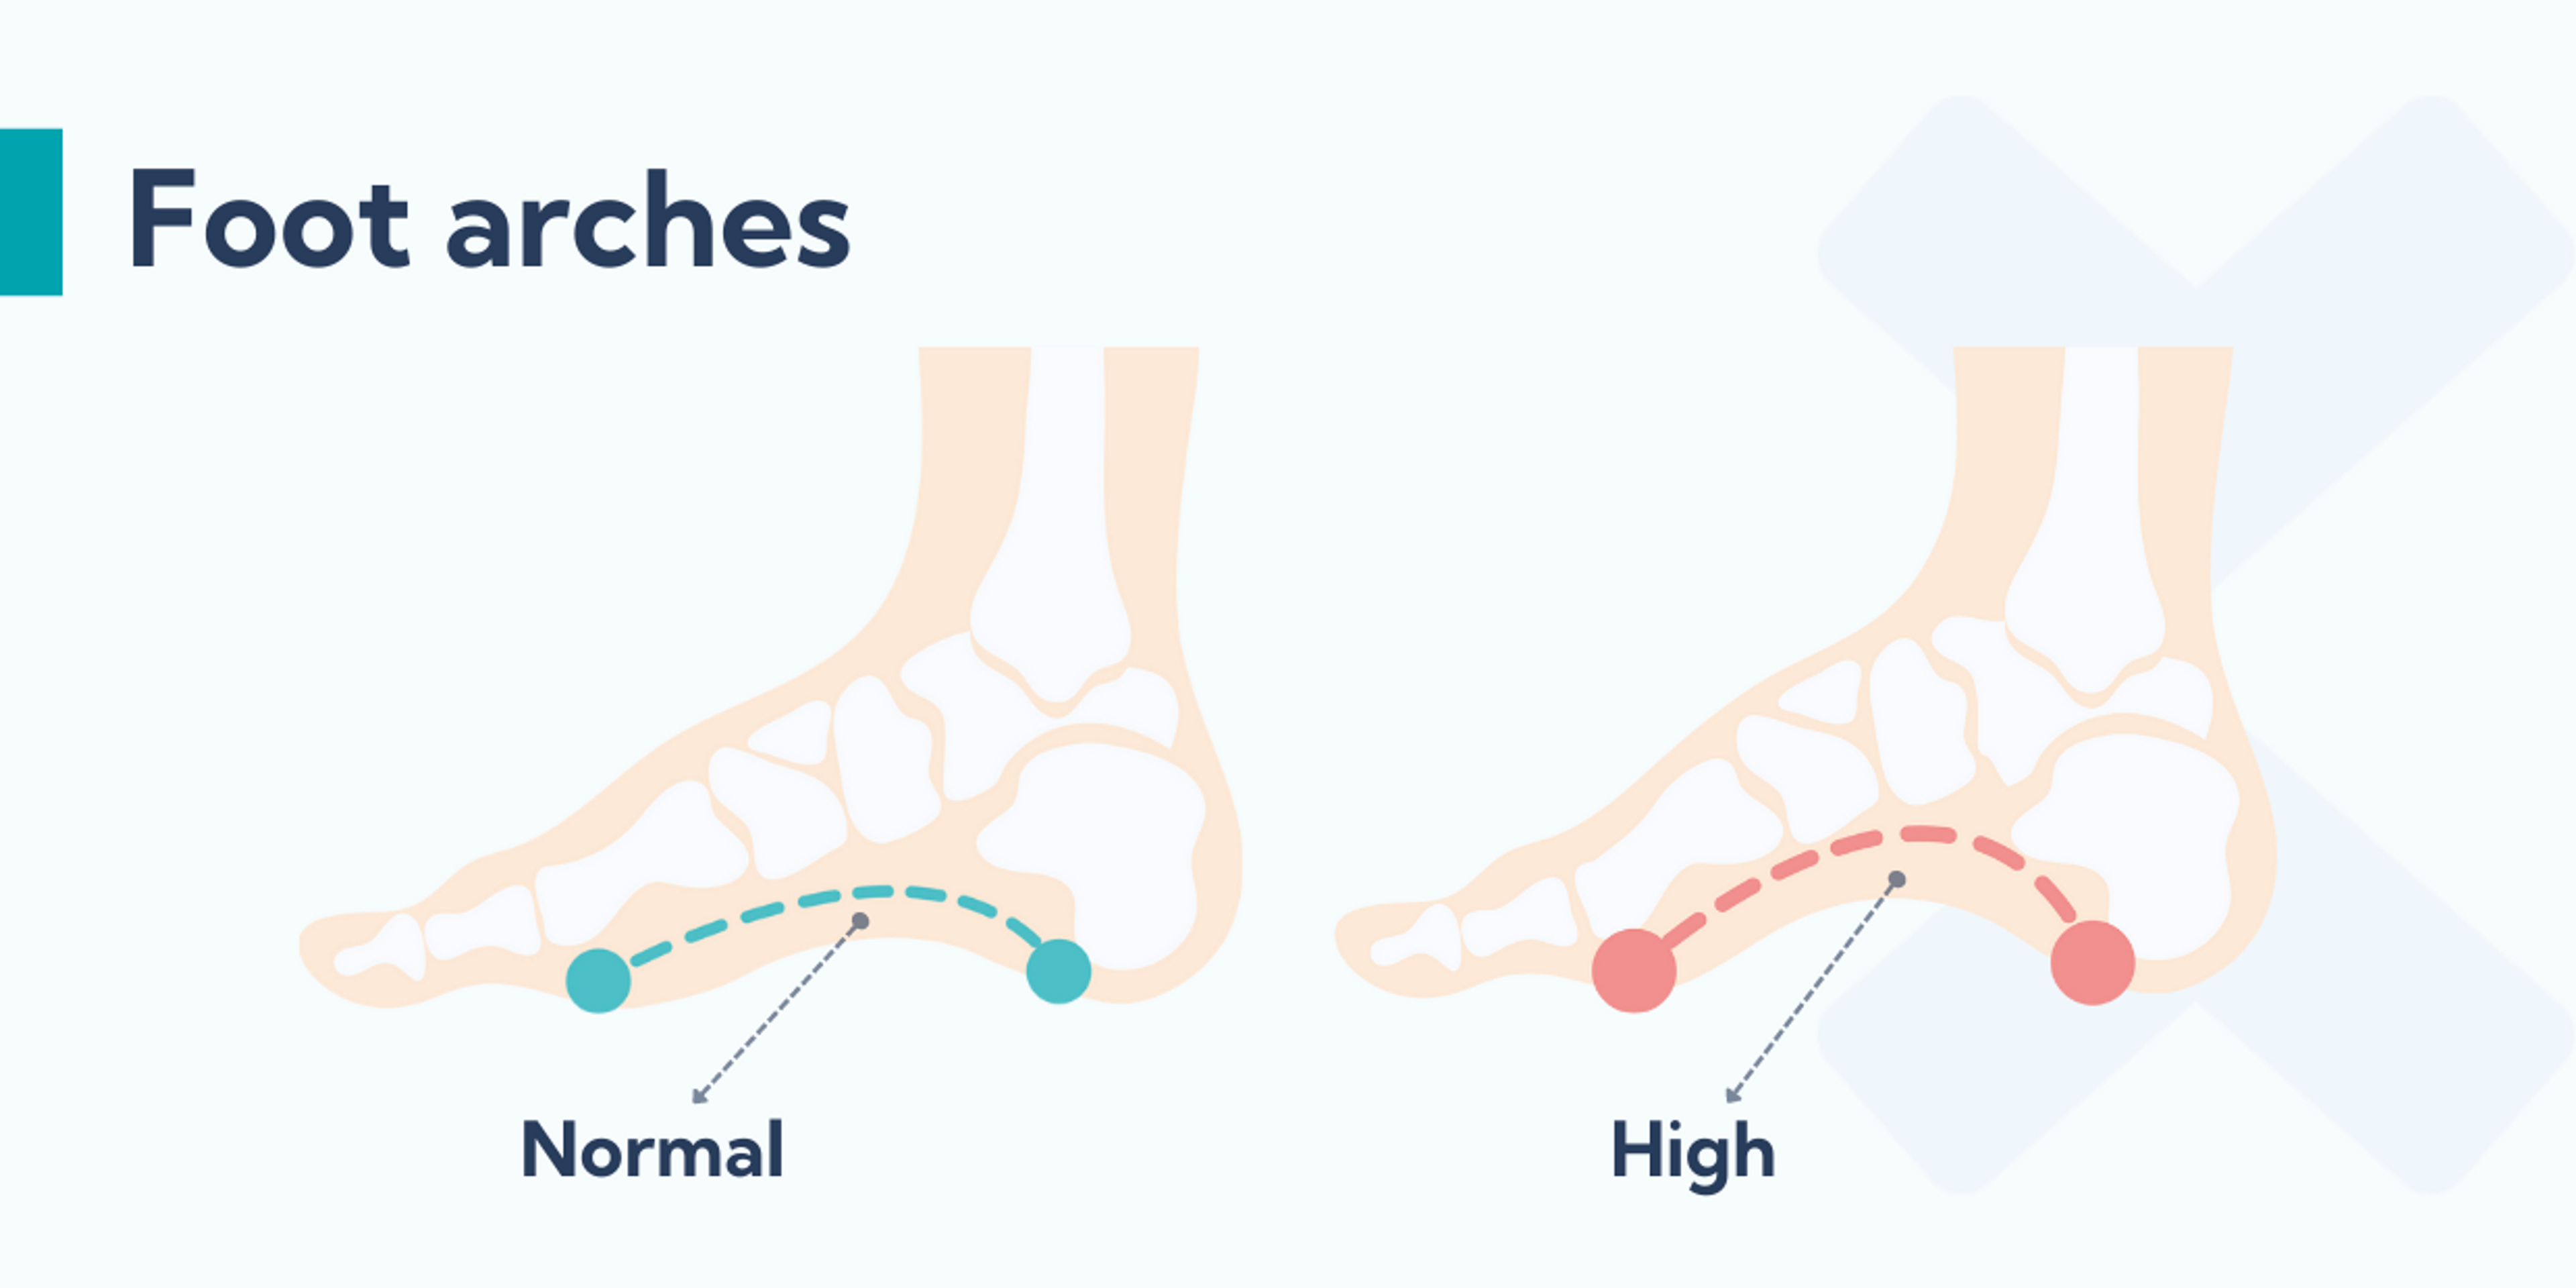 High foot arches can be a cause for shin splints.